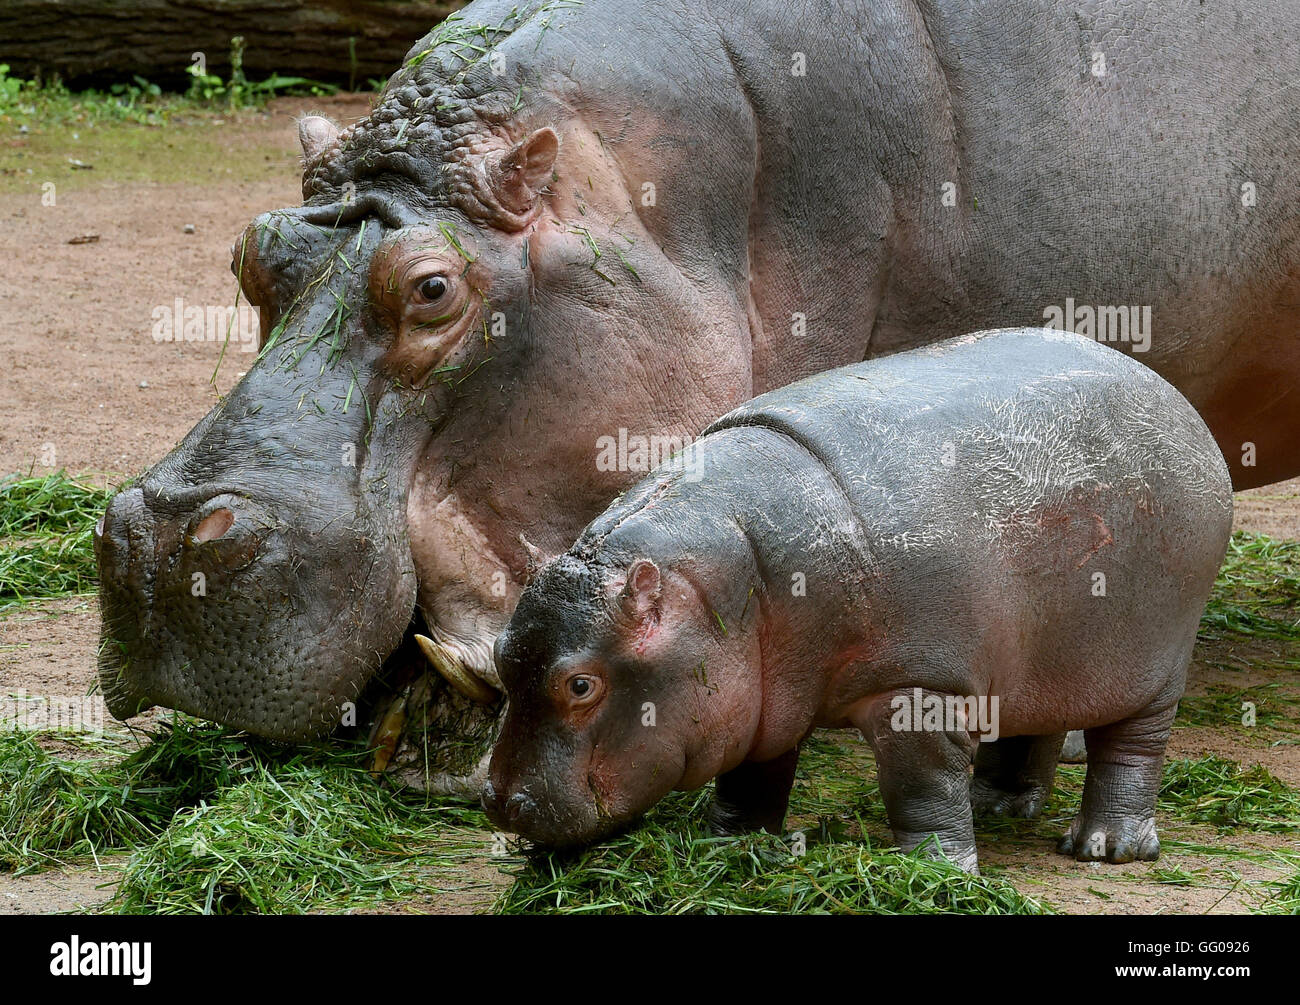 Hanover, Germany. 03rd Aug, 2016. Hippopotamus baby 'Pumeza, ' standing with its mother 'Cherry, ' is greeted with a large salad buffet in the shape of its name for its christening in the outdoor area at the Erlebnis Zoo in Hanover, Germany, 03 August 2016. The delicious surprise was really more of a present for 'Cherry.' The three-and-a-half-month-old 'Pumeza' still feeds mostly on mother's milk and only tries solid foods now and again. Photo: HOLGER HOLLEMANN/dpa/Alamy Live News Stock Photo